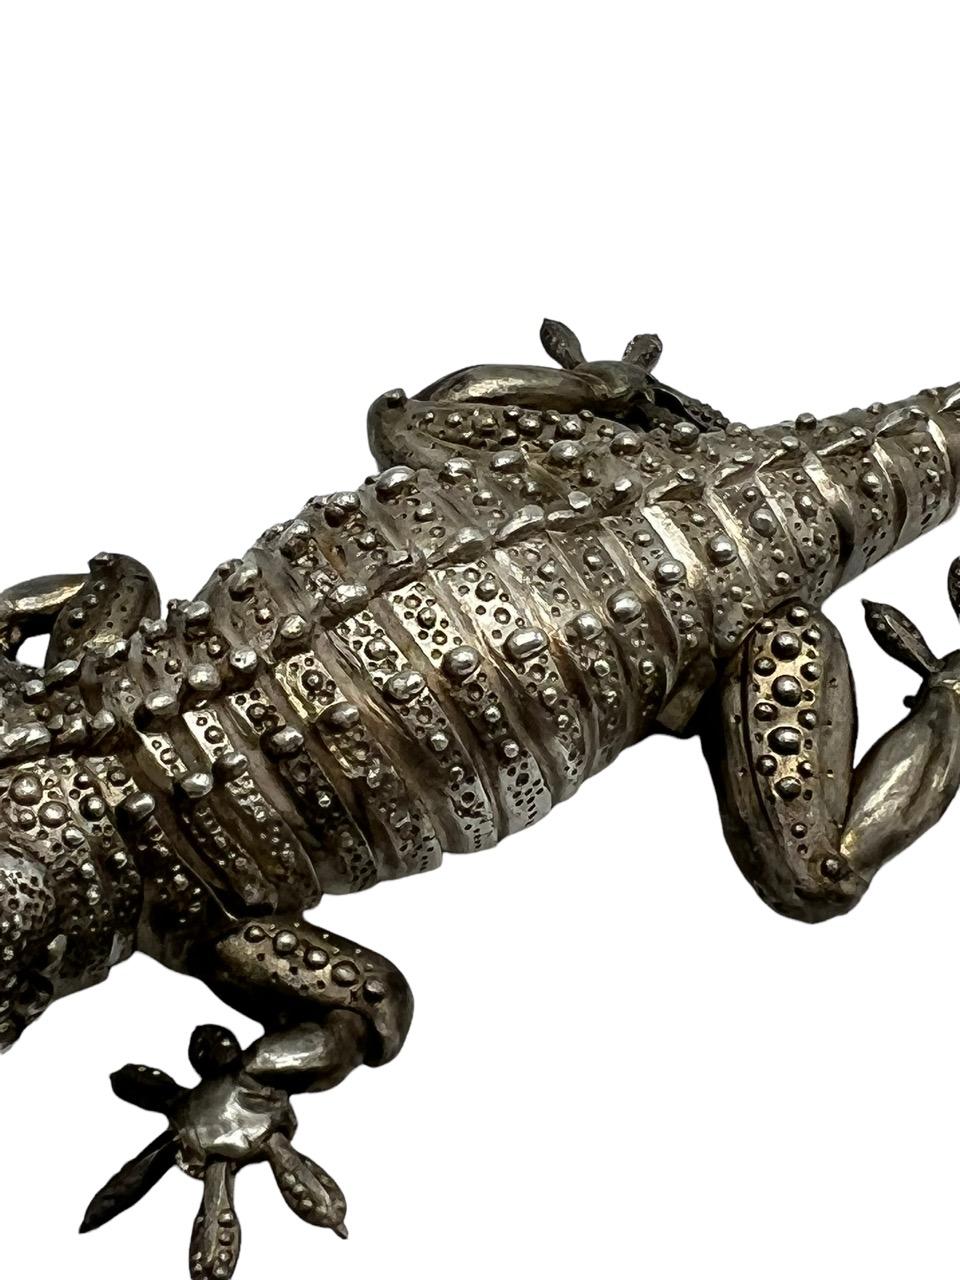 Contemporary Oleg Konstantinov Fully Articulated Gecko Made of Sterling Silver For Sale